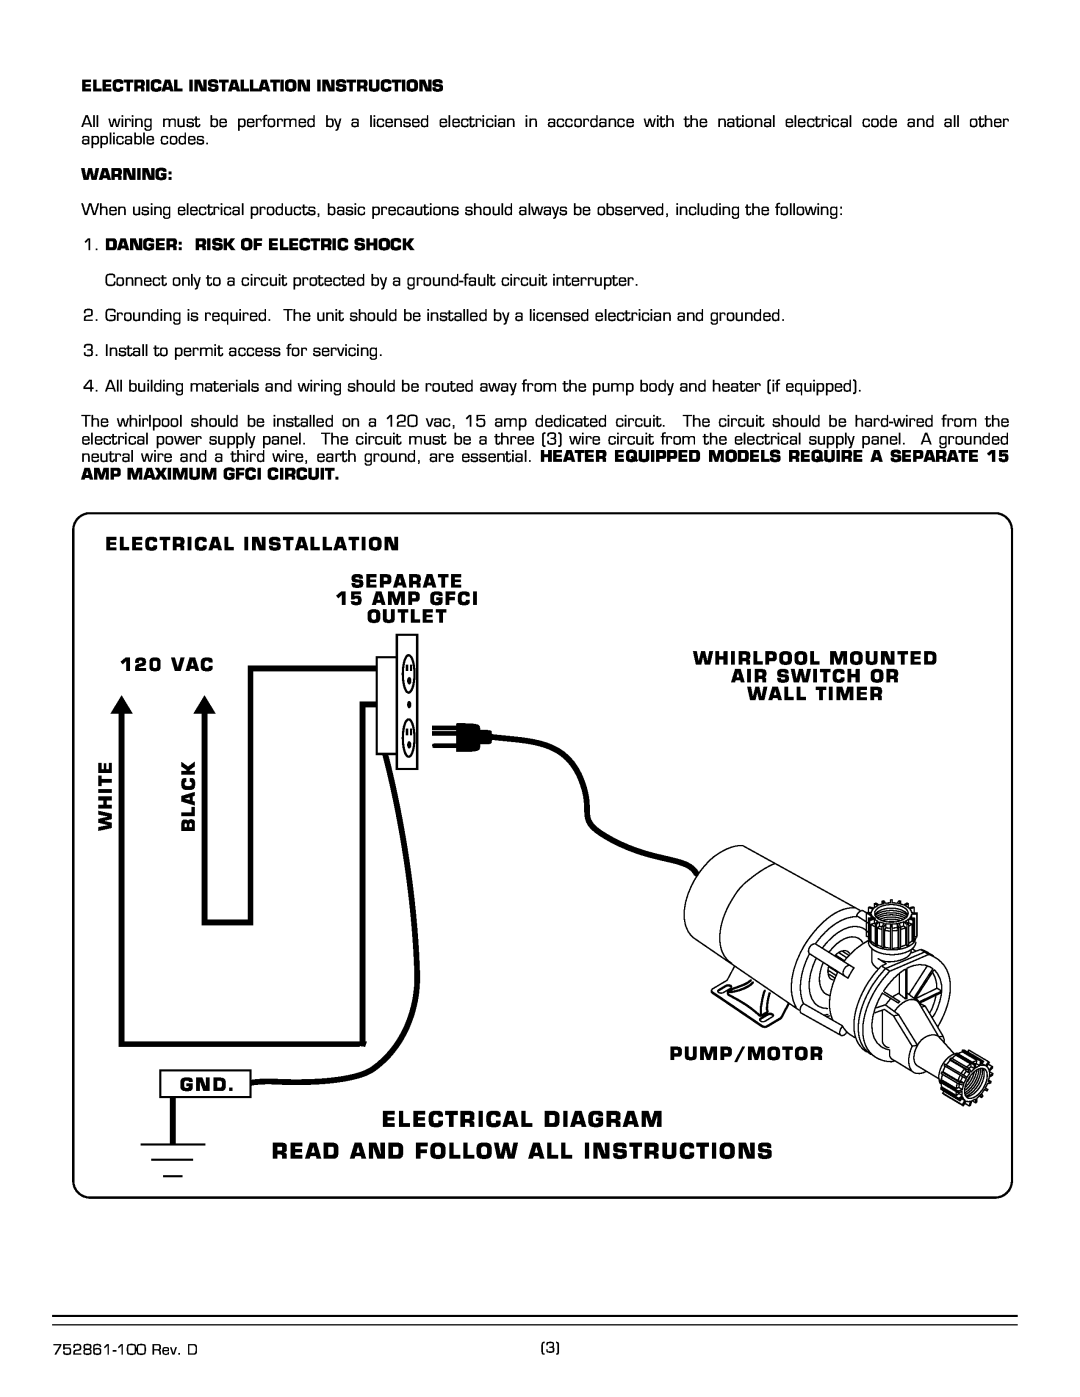 American Standard 2772E SERIES Electrical Diagram, Read And Follow All Instructions, Electrical Installation Instructions 